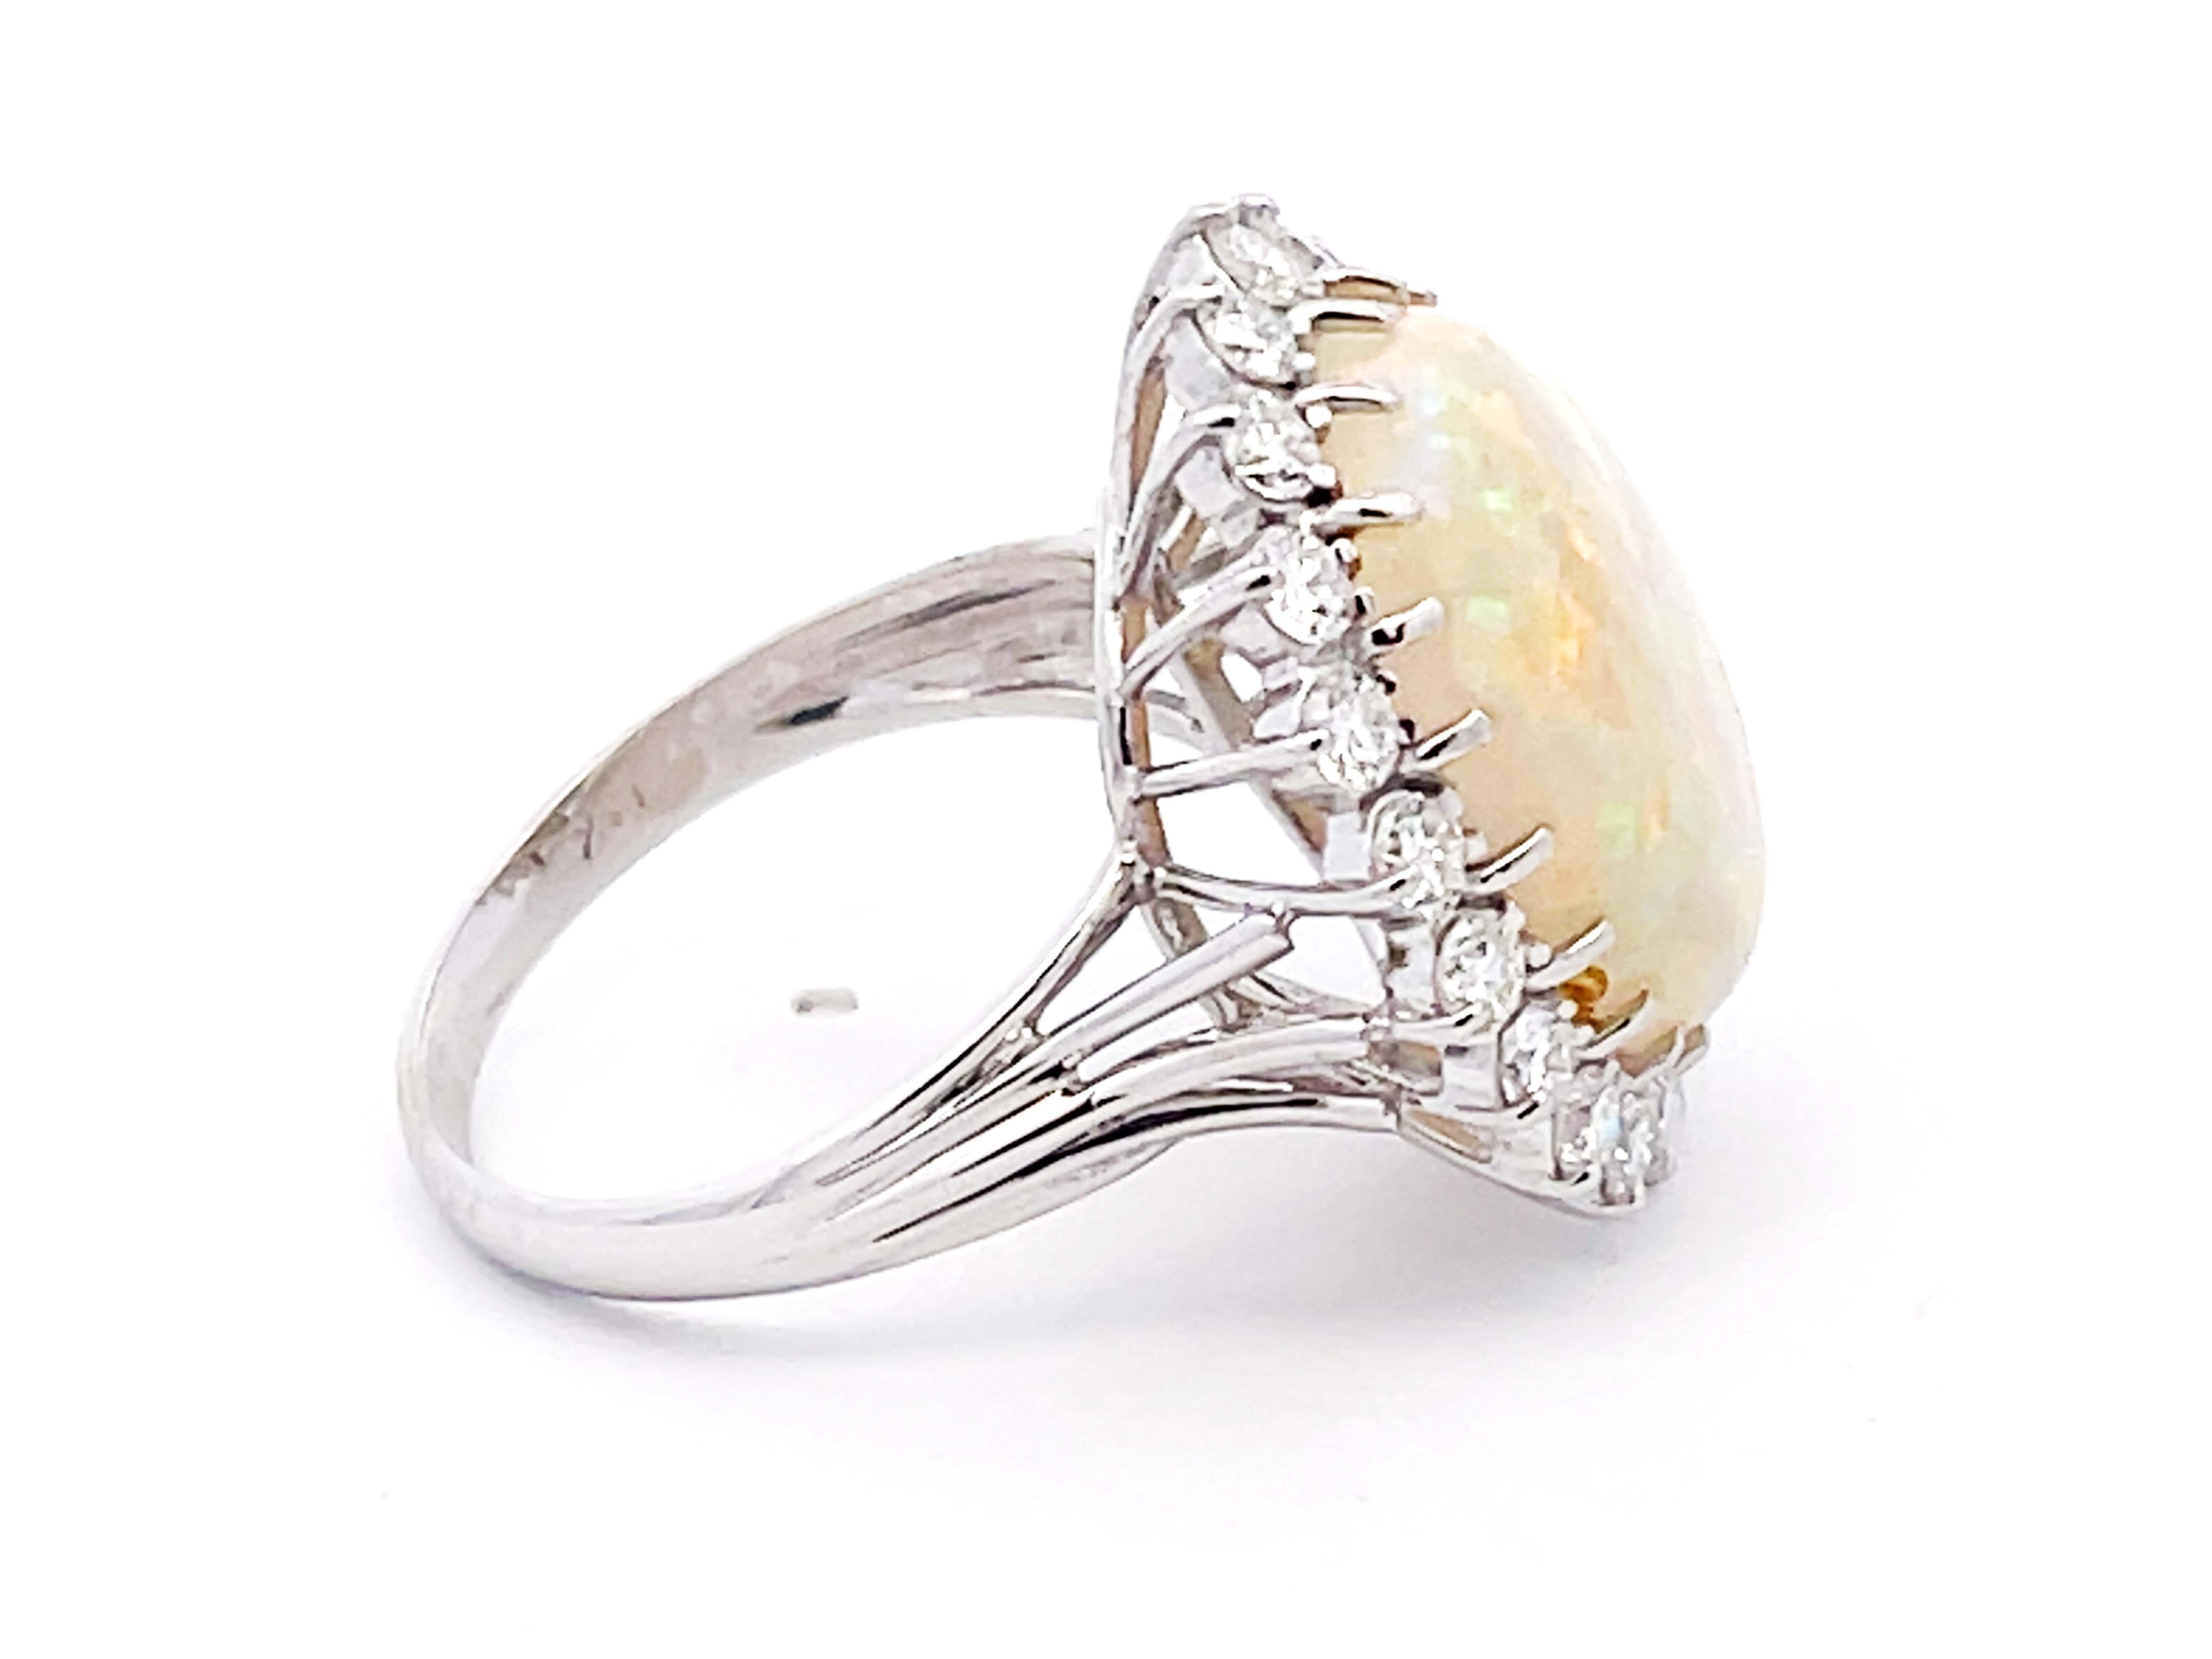 Ethiopian Opal and Diamond Halo Ring in 14k White Gold In Excellent Condition For Sale In Honolulu, HI